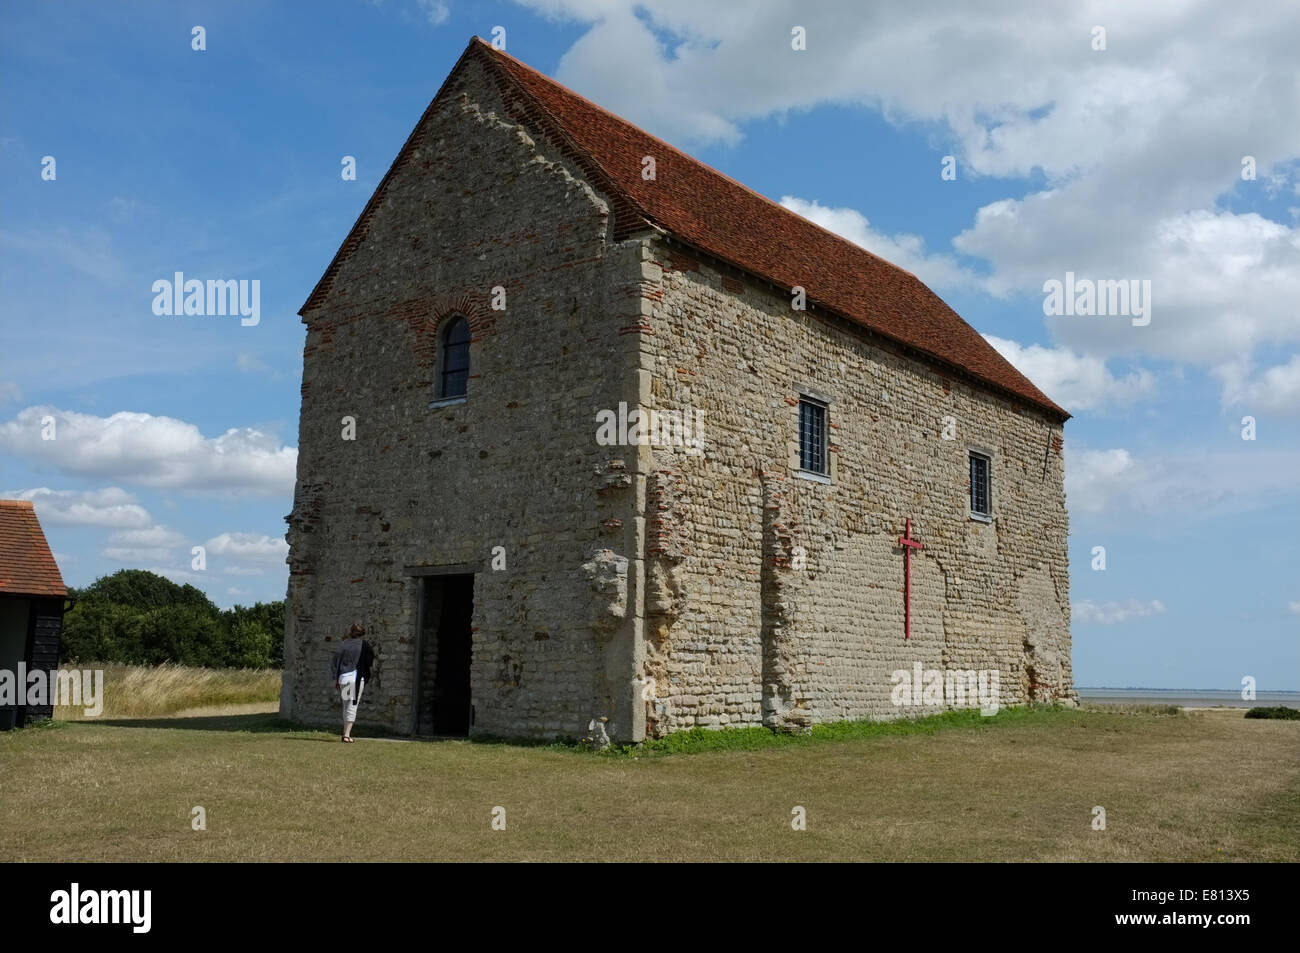 The Chapel of St Peter-on-the-Wall, Bradwell-on-Sea, Essex UK Stock Photo